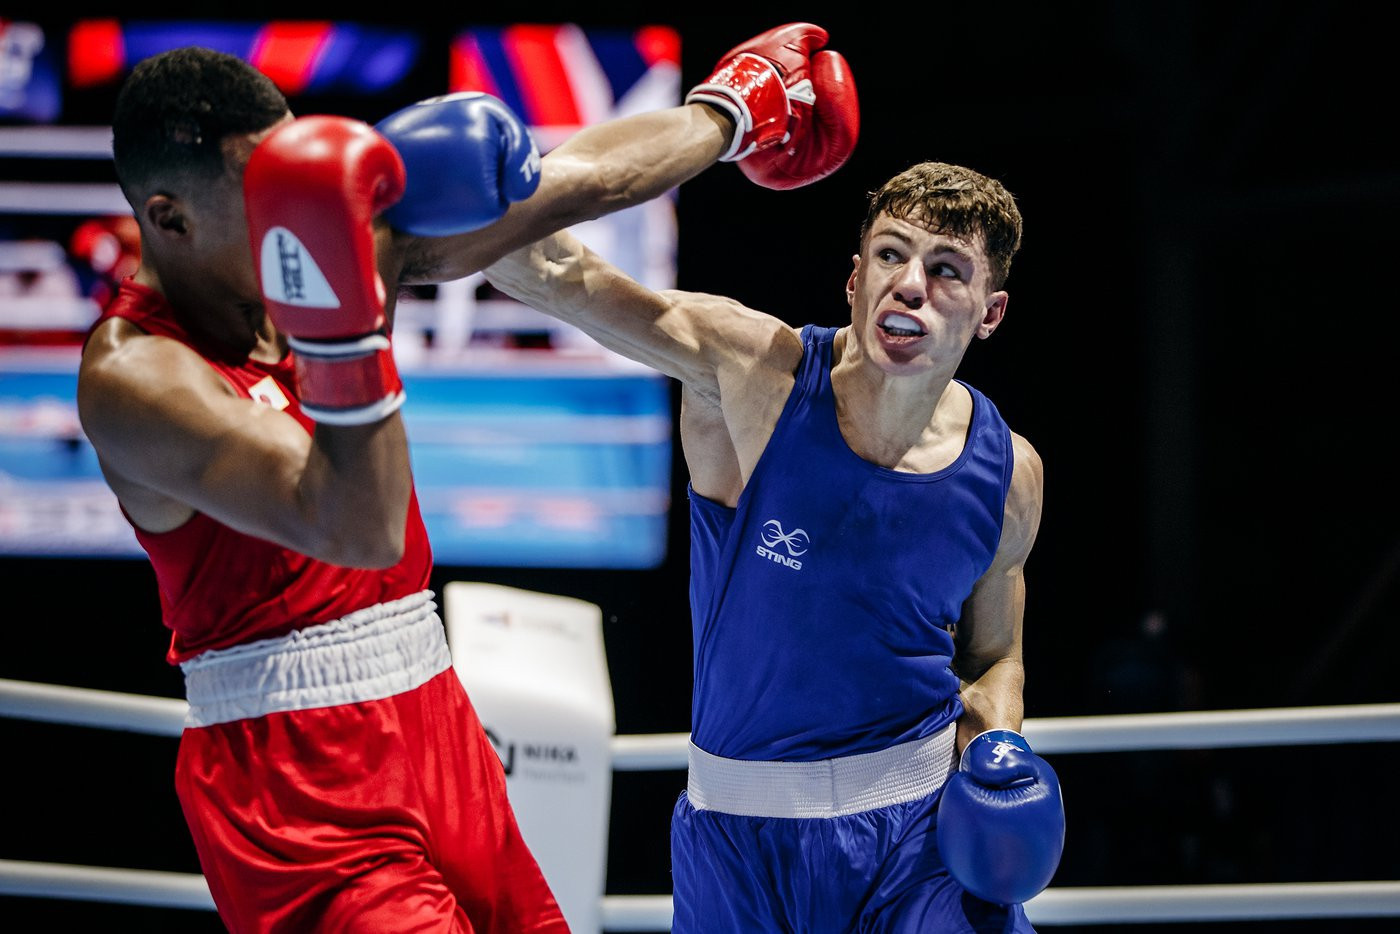 insidethegames is reporting LIVE from the AIBA Men’s World Championships in Yekaterinburg